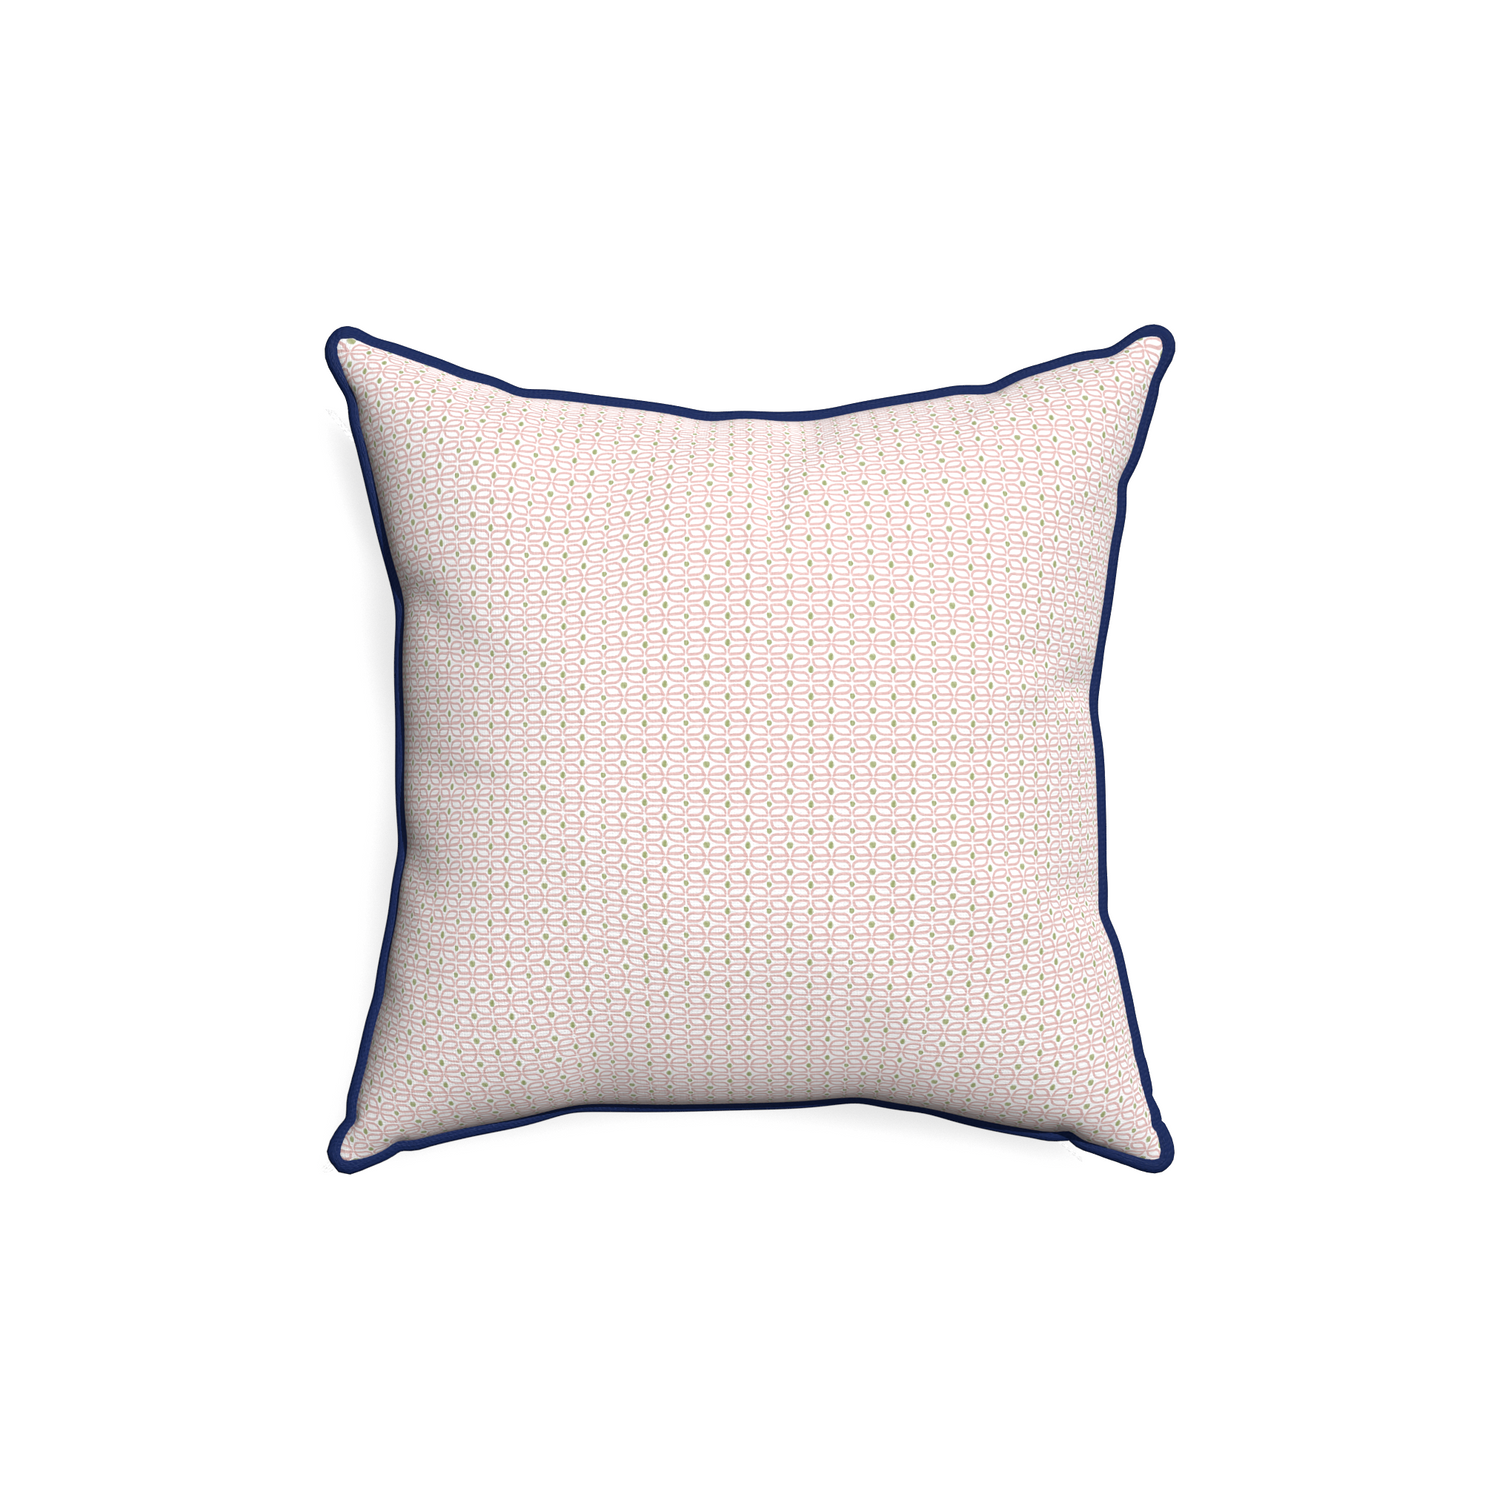 18-square loomi pink custom pink geometricpillow with midnight piping on white background